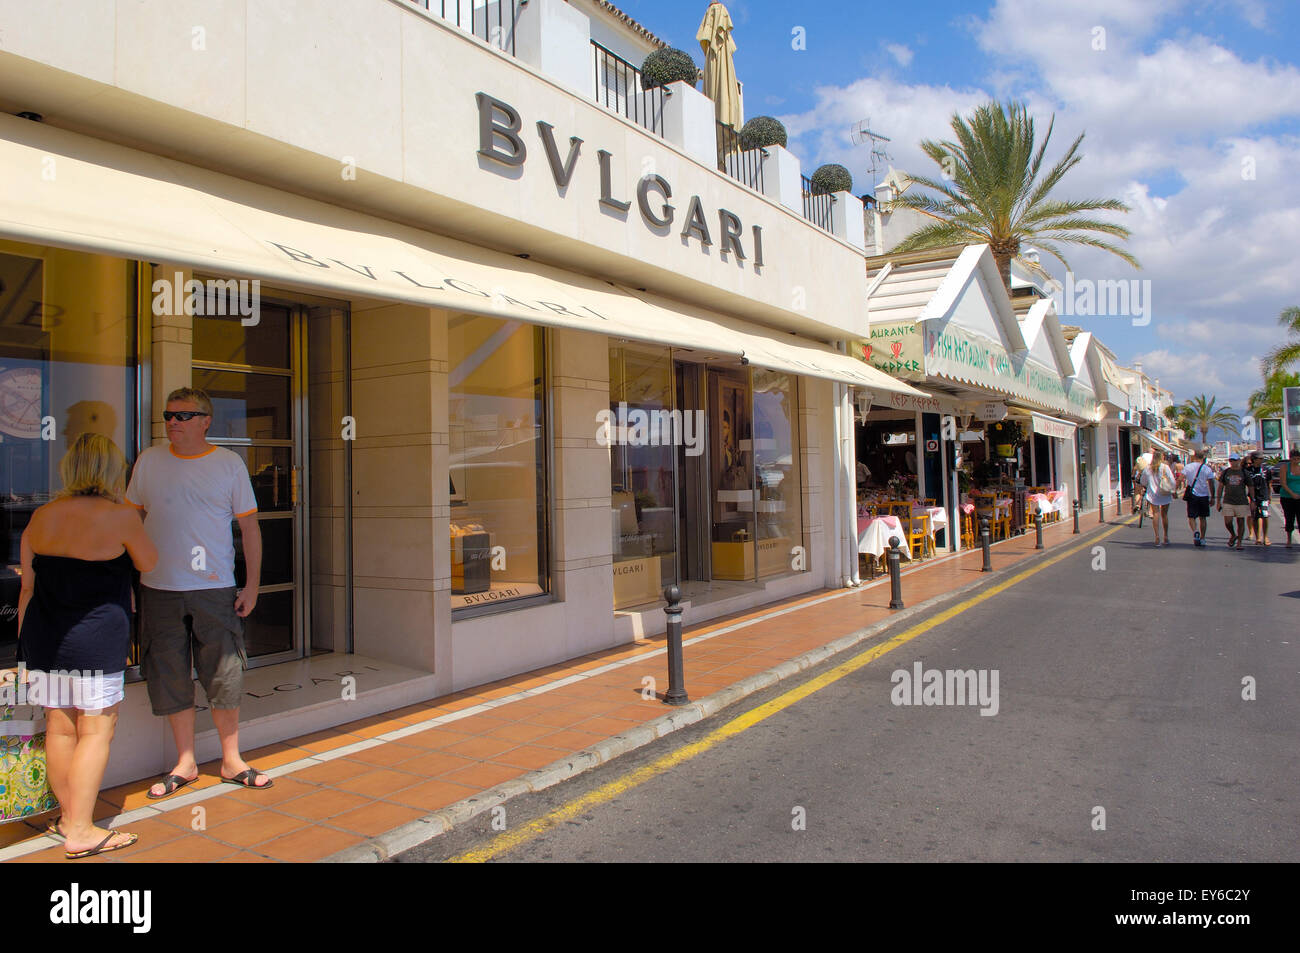 Puerto Banus, Spain - August 15, 2015: Louis Vuitton Shop In Puerto Banus,  A Marina Near Marbella, Andalusia, Spain Stock Photo, Picture And Royalty  Free Image. Image 46586480.